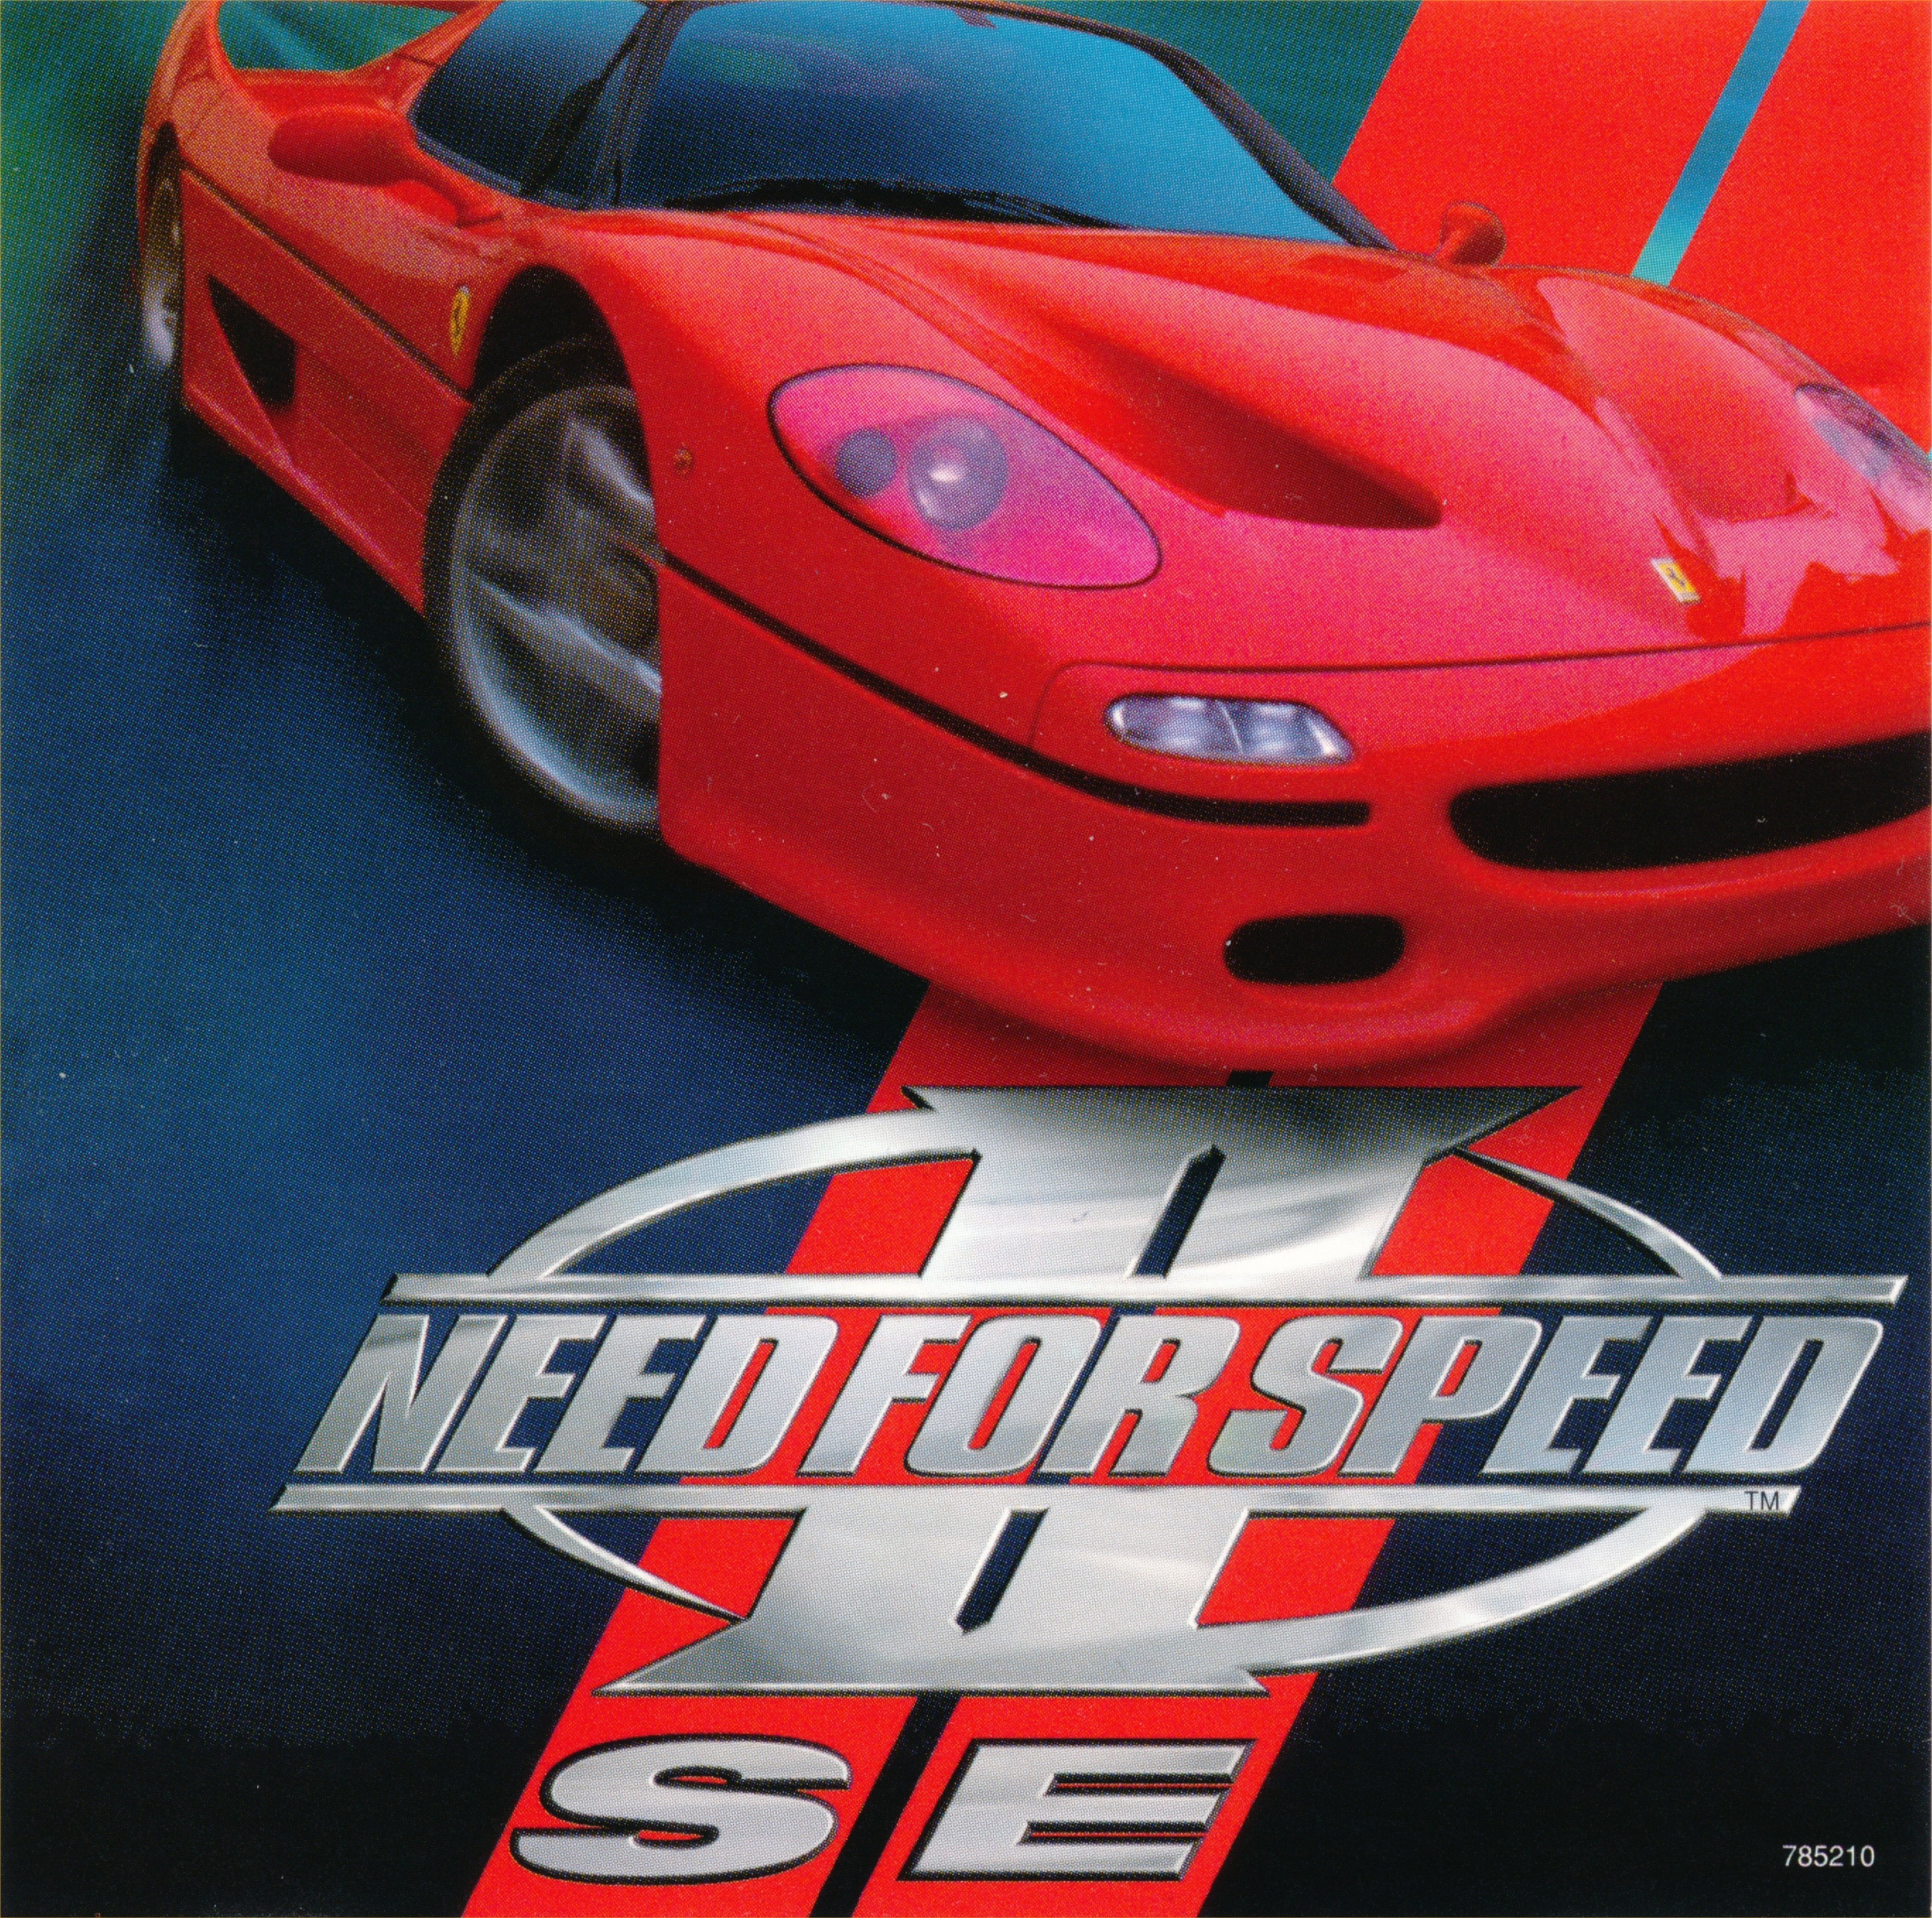 Speed 2 games. Need for Speed II 1997 ps1. Need for Speed 2 se 1997. Need for Speed II - Special Edition. Need for Speed II 1997 игра.